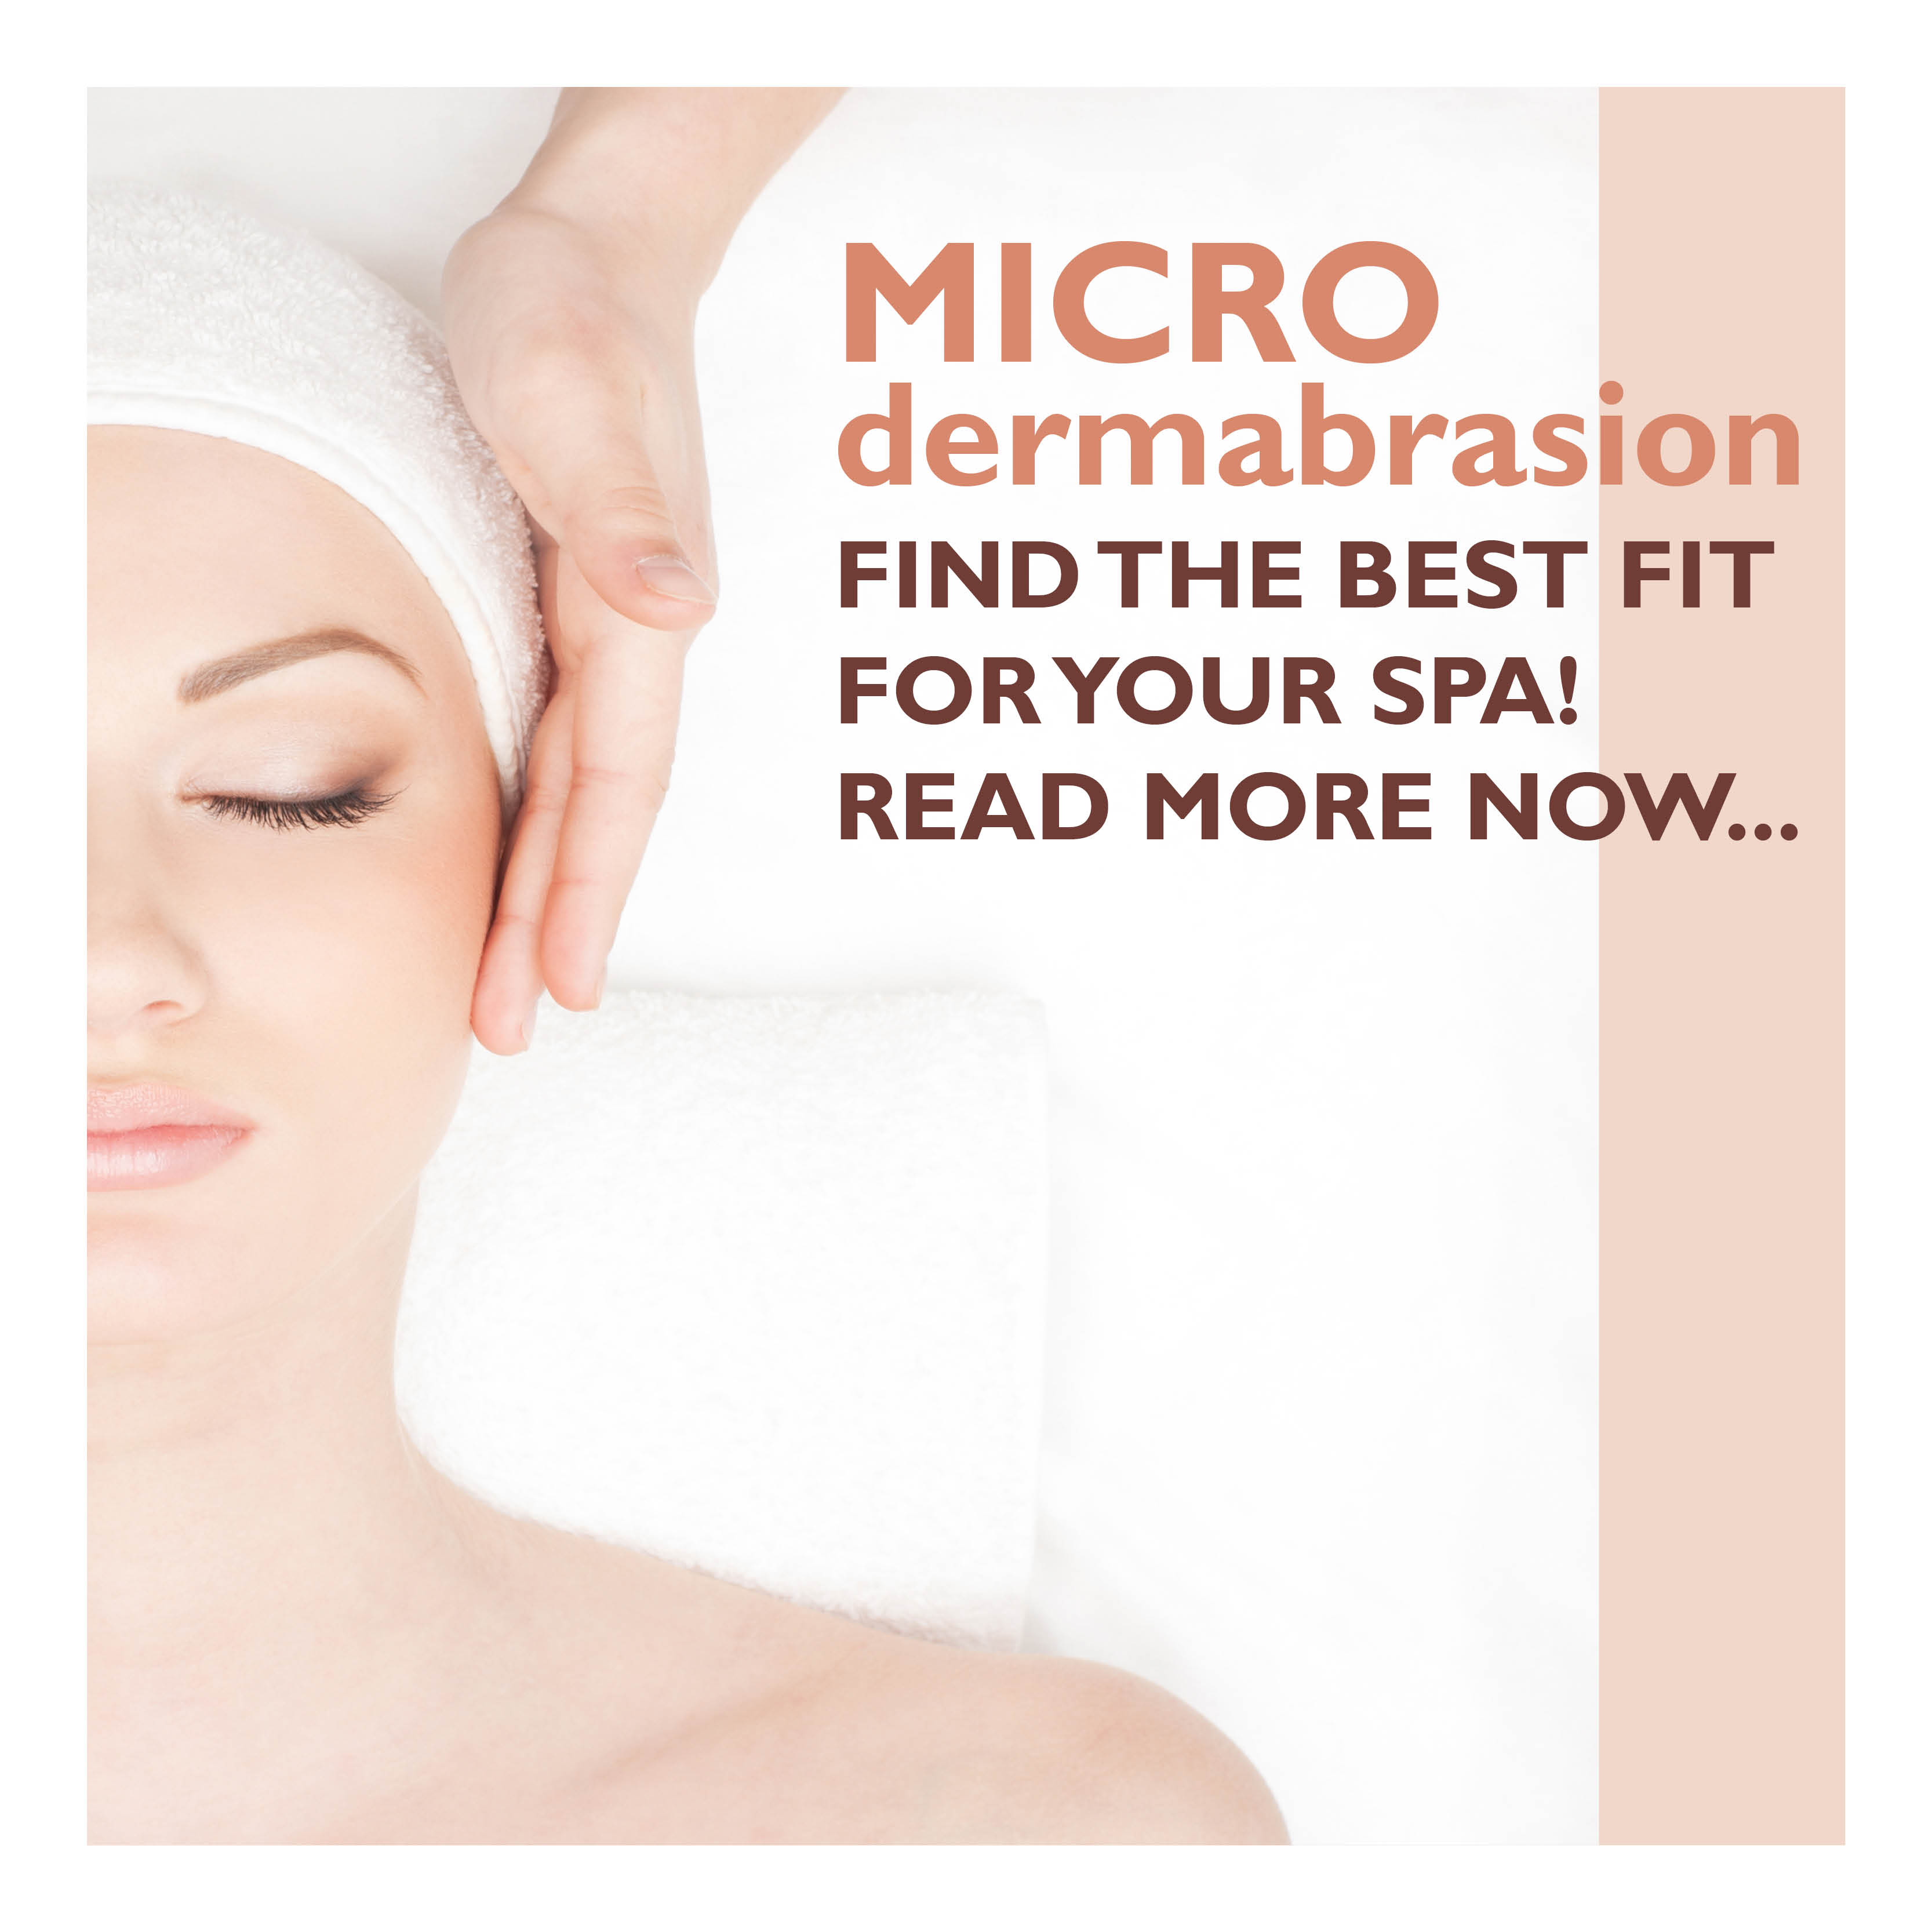 https://skinforlife.com/how-to-select-a-microdermabrasion/